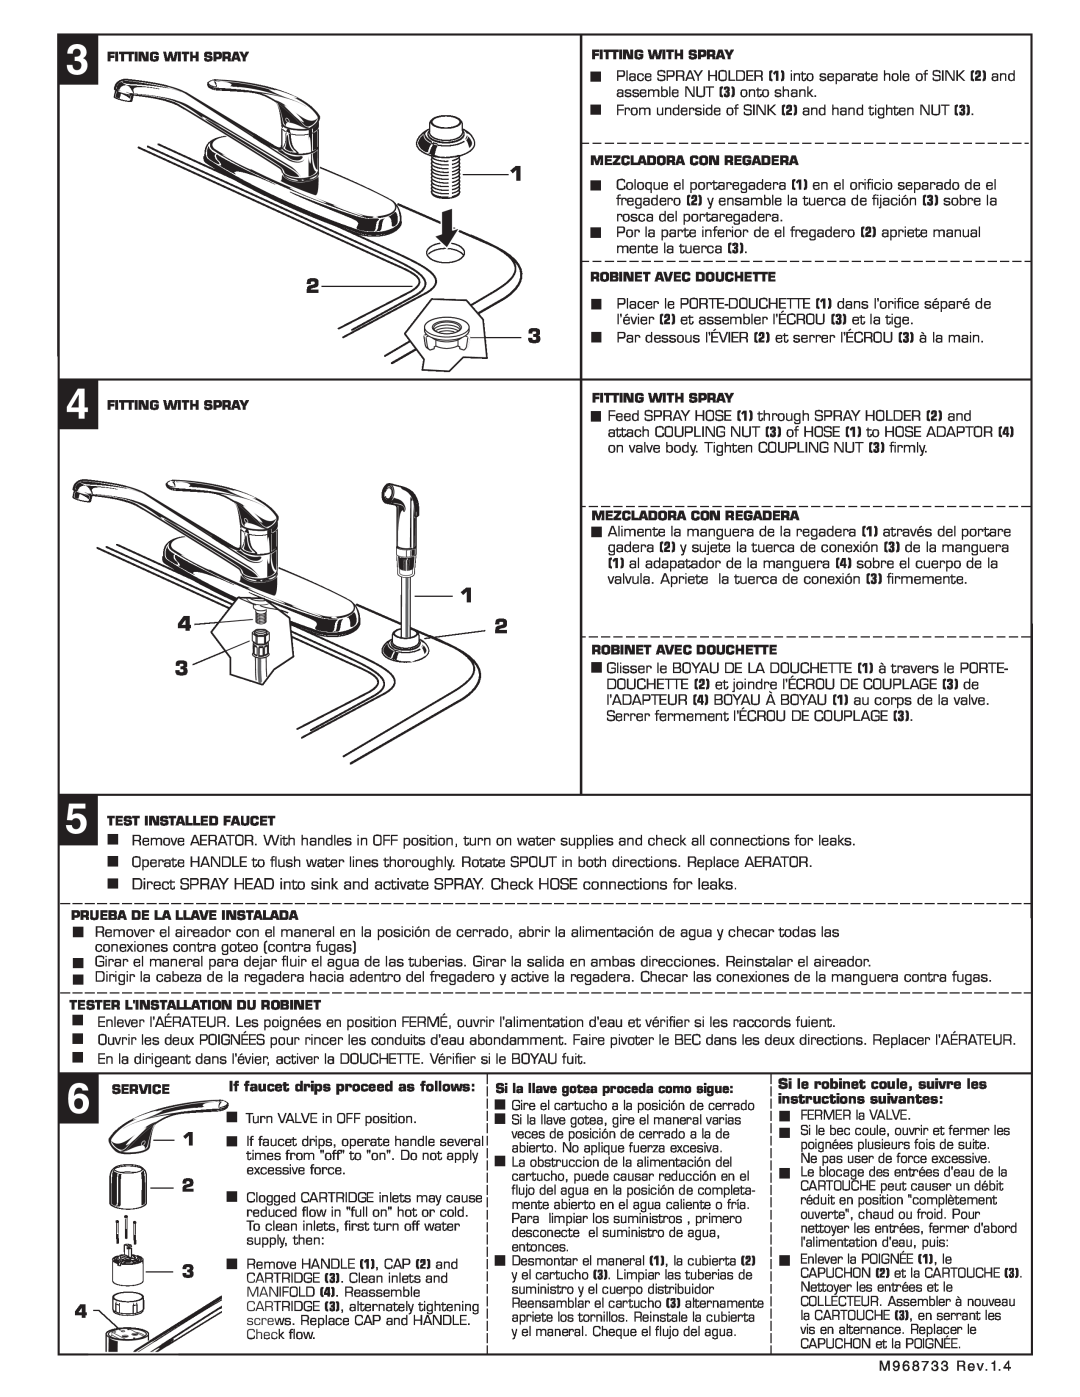 American Standard 4175.501 installation instructions If faucet drips proceed as follows 